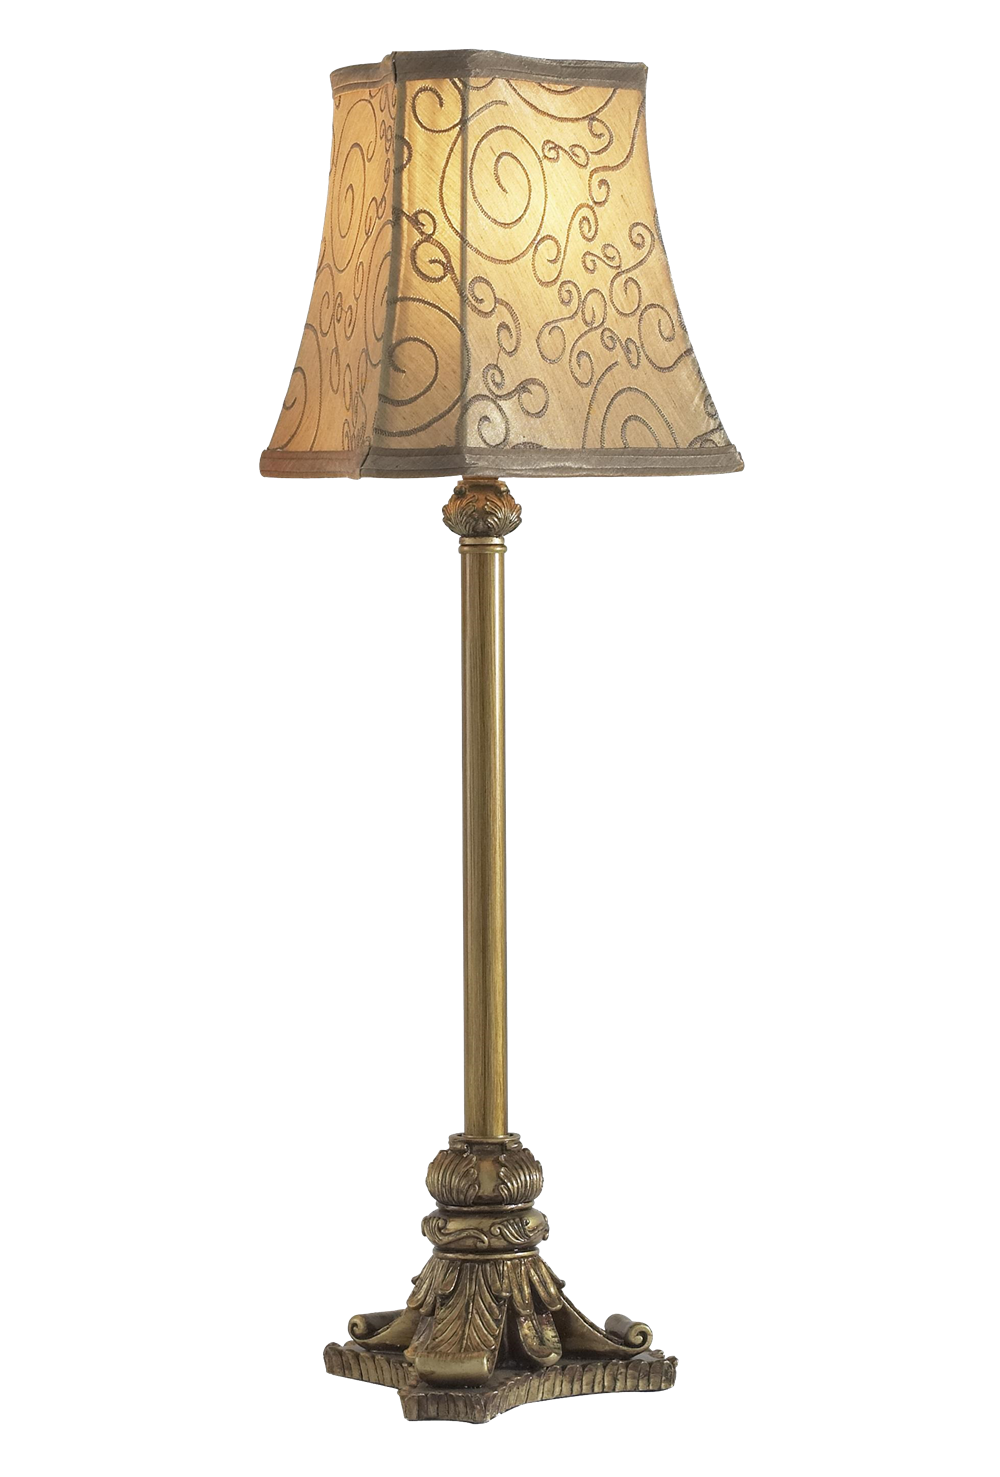 Light Lamp Electric Free HQ Image PNG Image